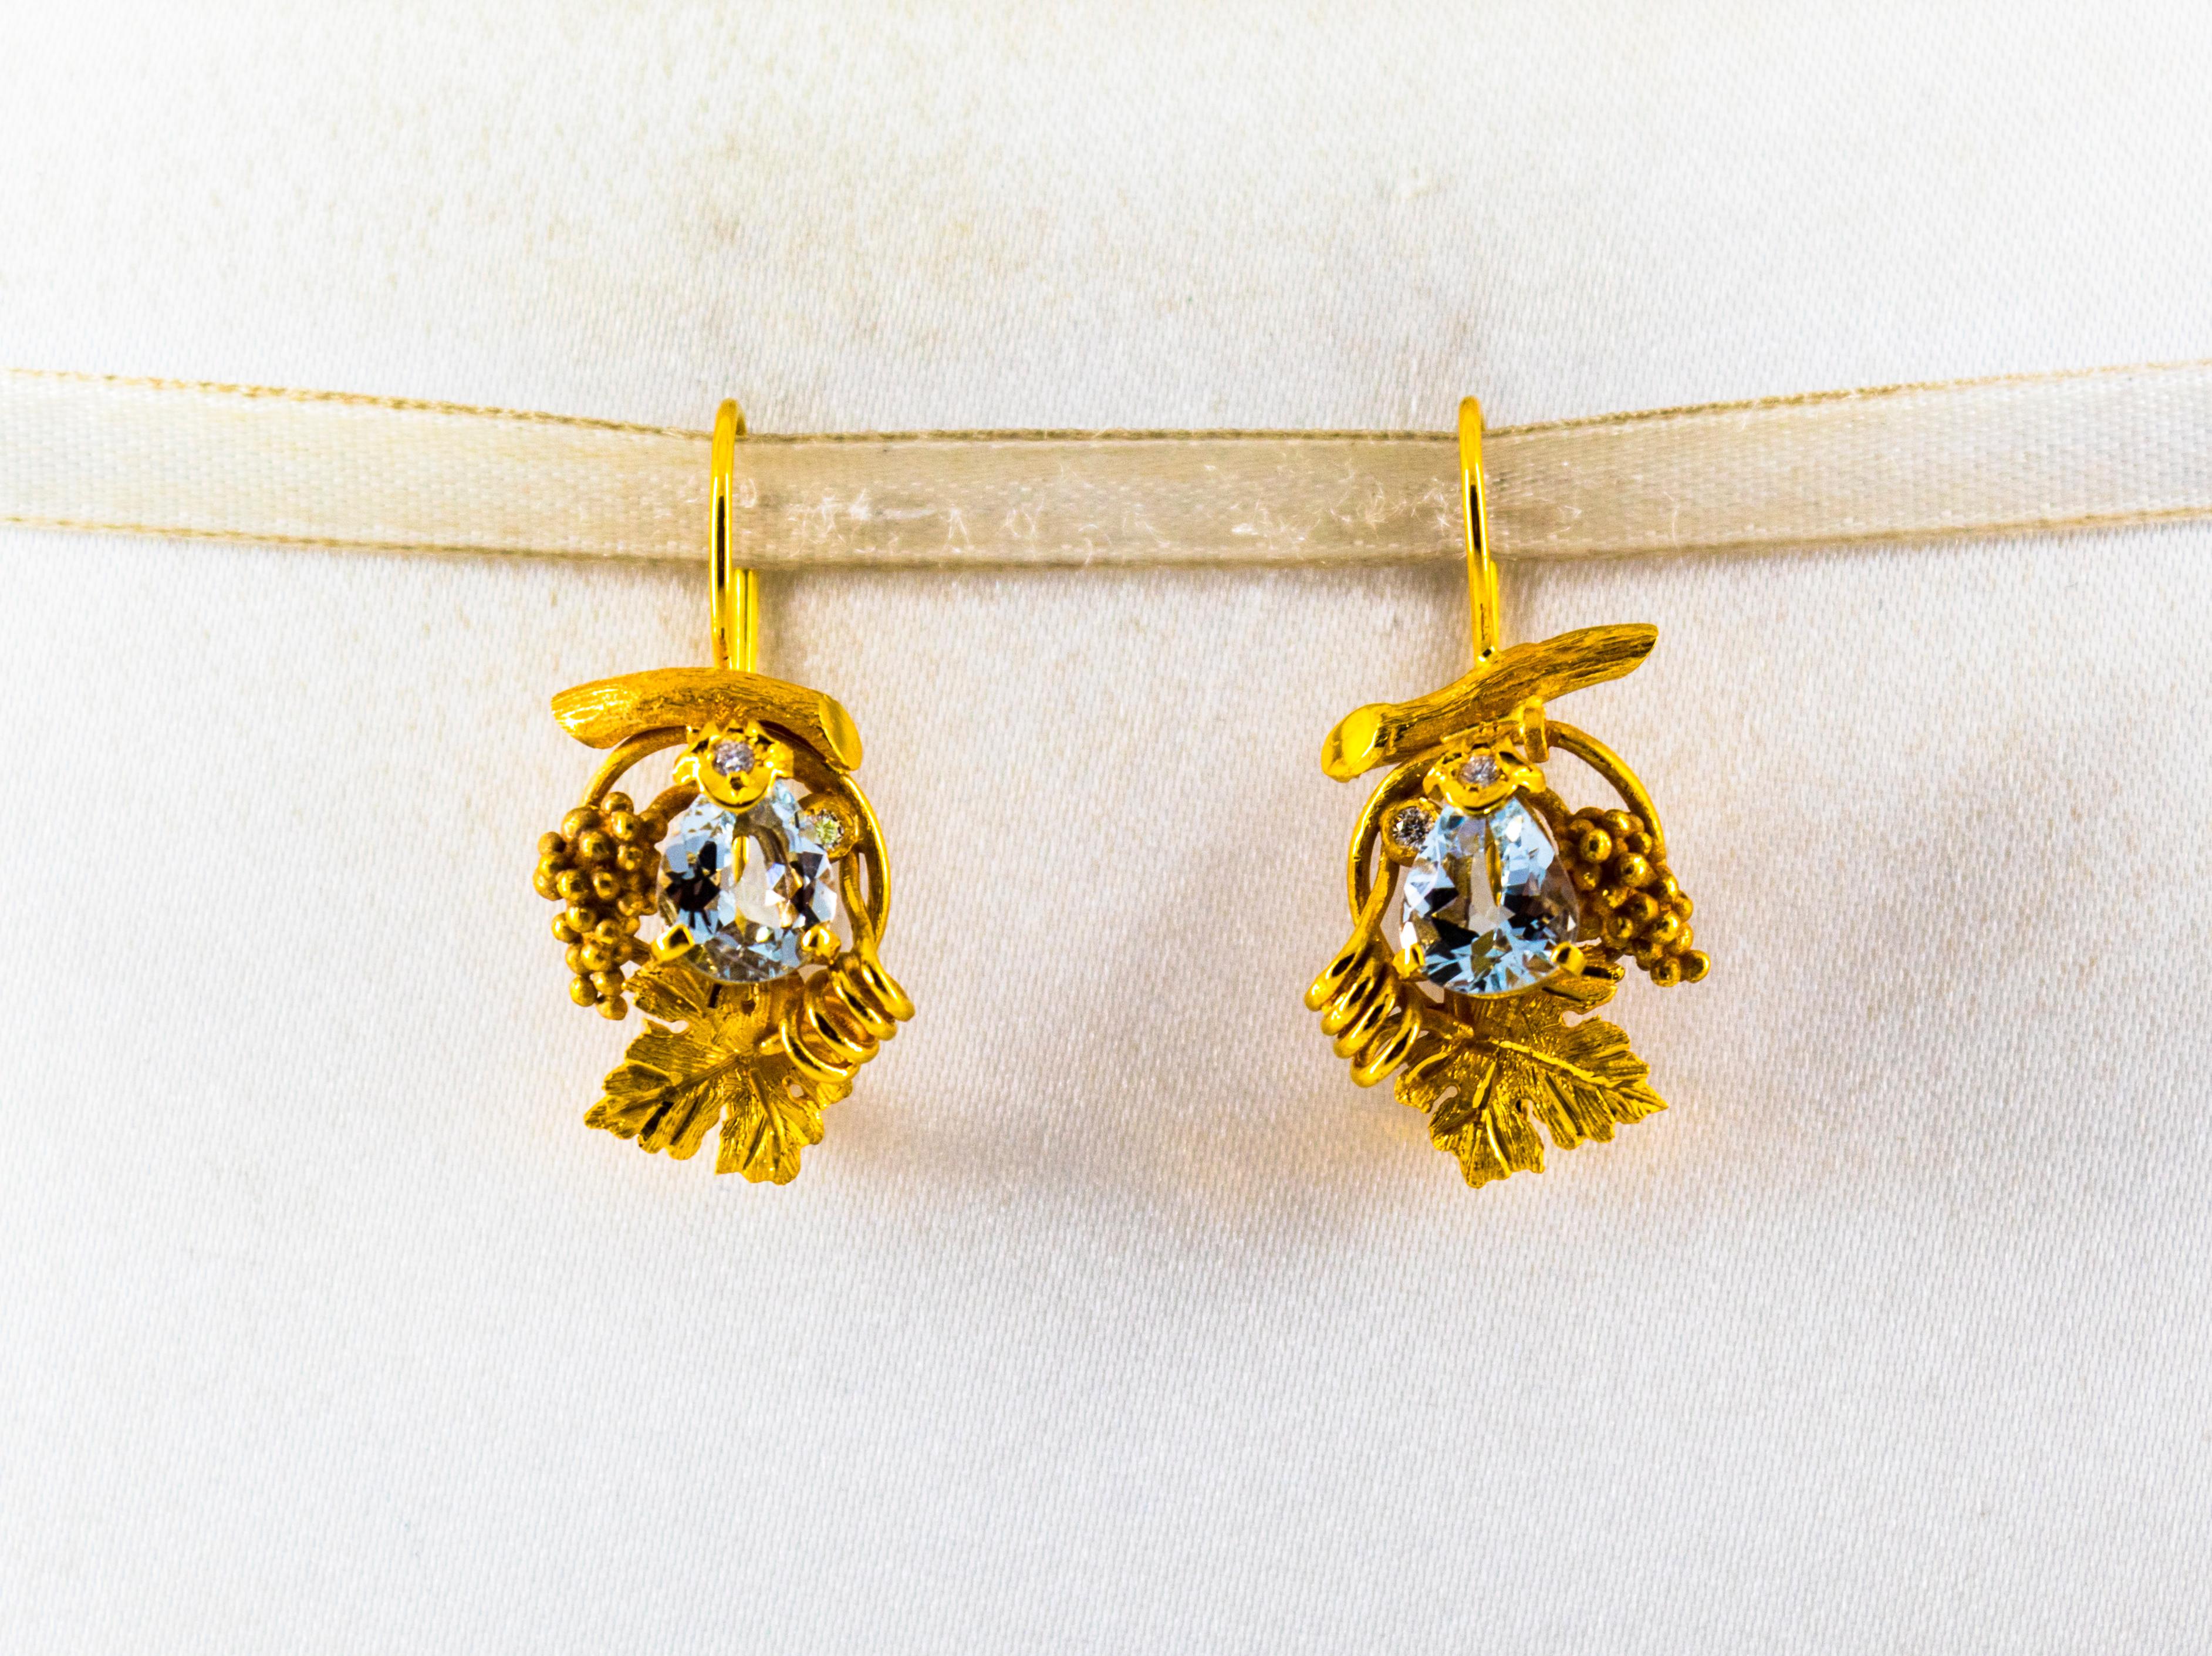 These Earrings are made of 14K Yellow Gold.
These Earrings have 0.12 Carats of White Brilliant Cut Diamonds.
These Earrings have 2.40 Carats of Aquamarine.
These Earrings are available also with Tanzanite.
These Earrings are inspired by Art